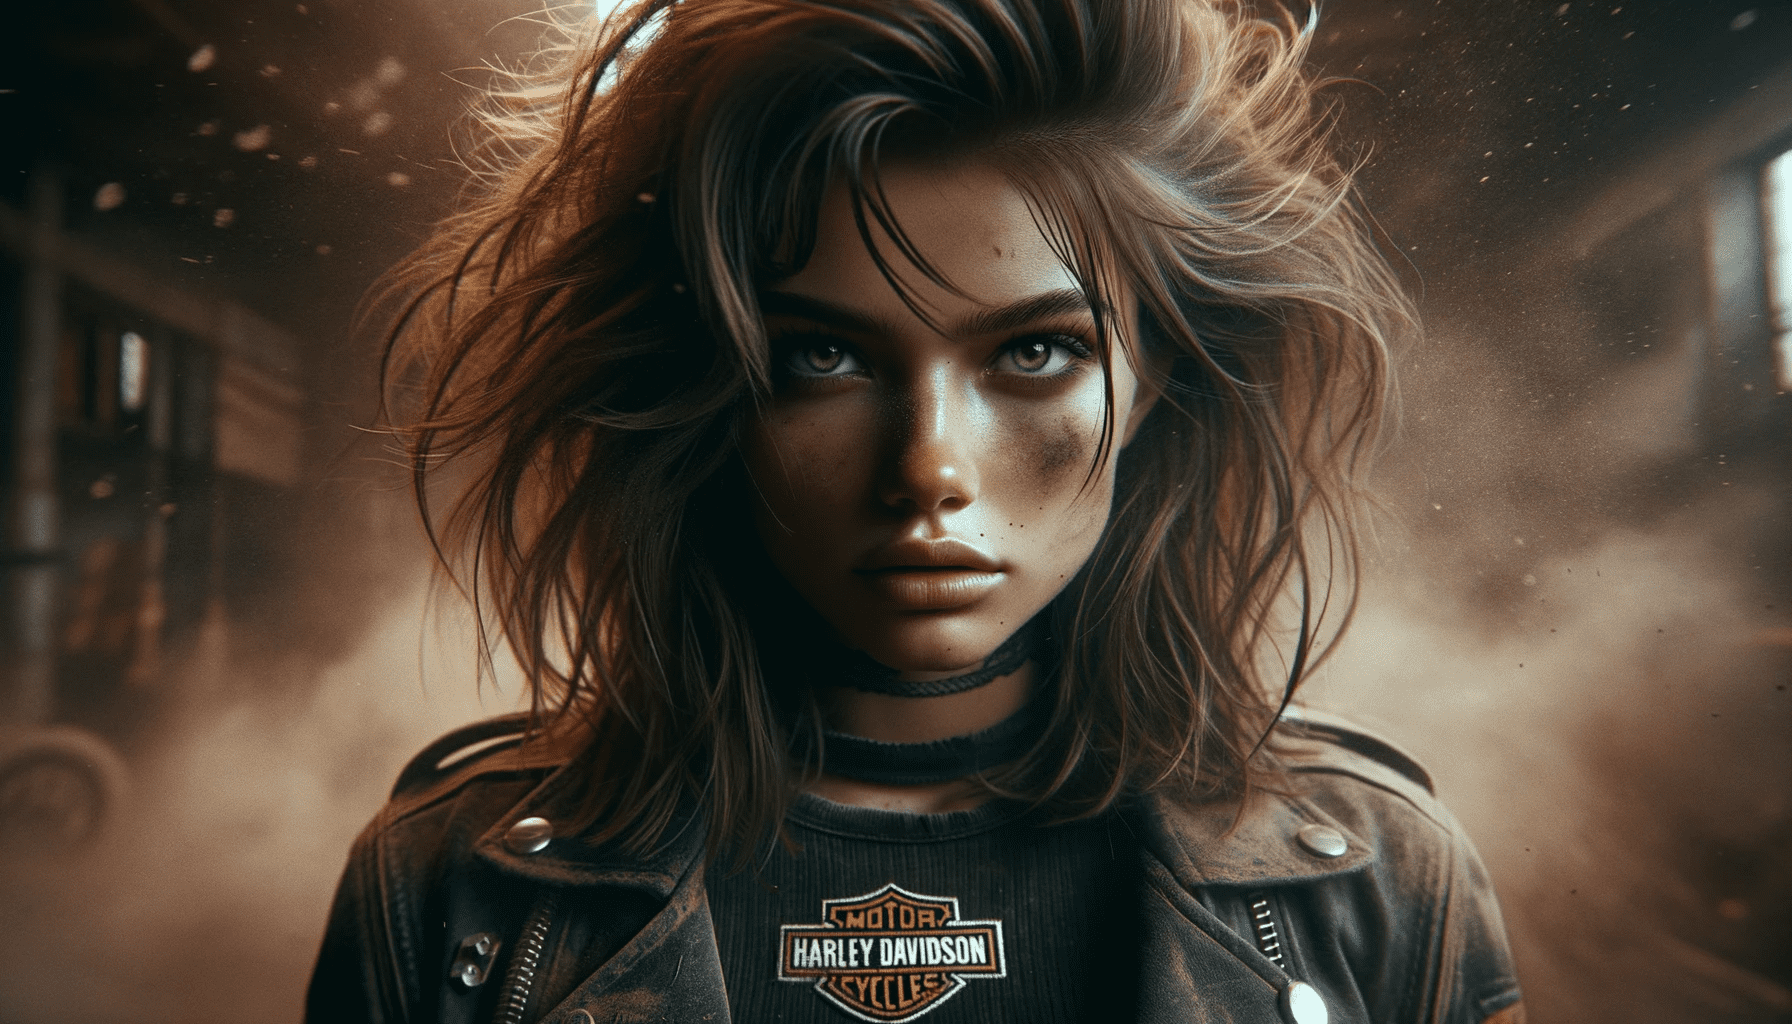 DALL·E 2023-10-25 03.58.30 - 4K ultra-detailed cinematic portrait of the girl from the third image, enhanced to look even more wild and rebellious. Her hair appears more tousled,